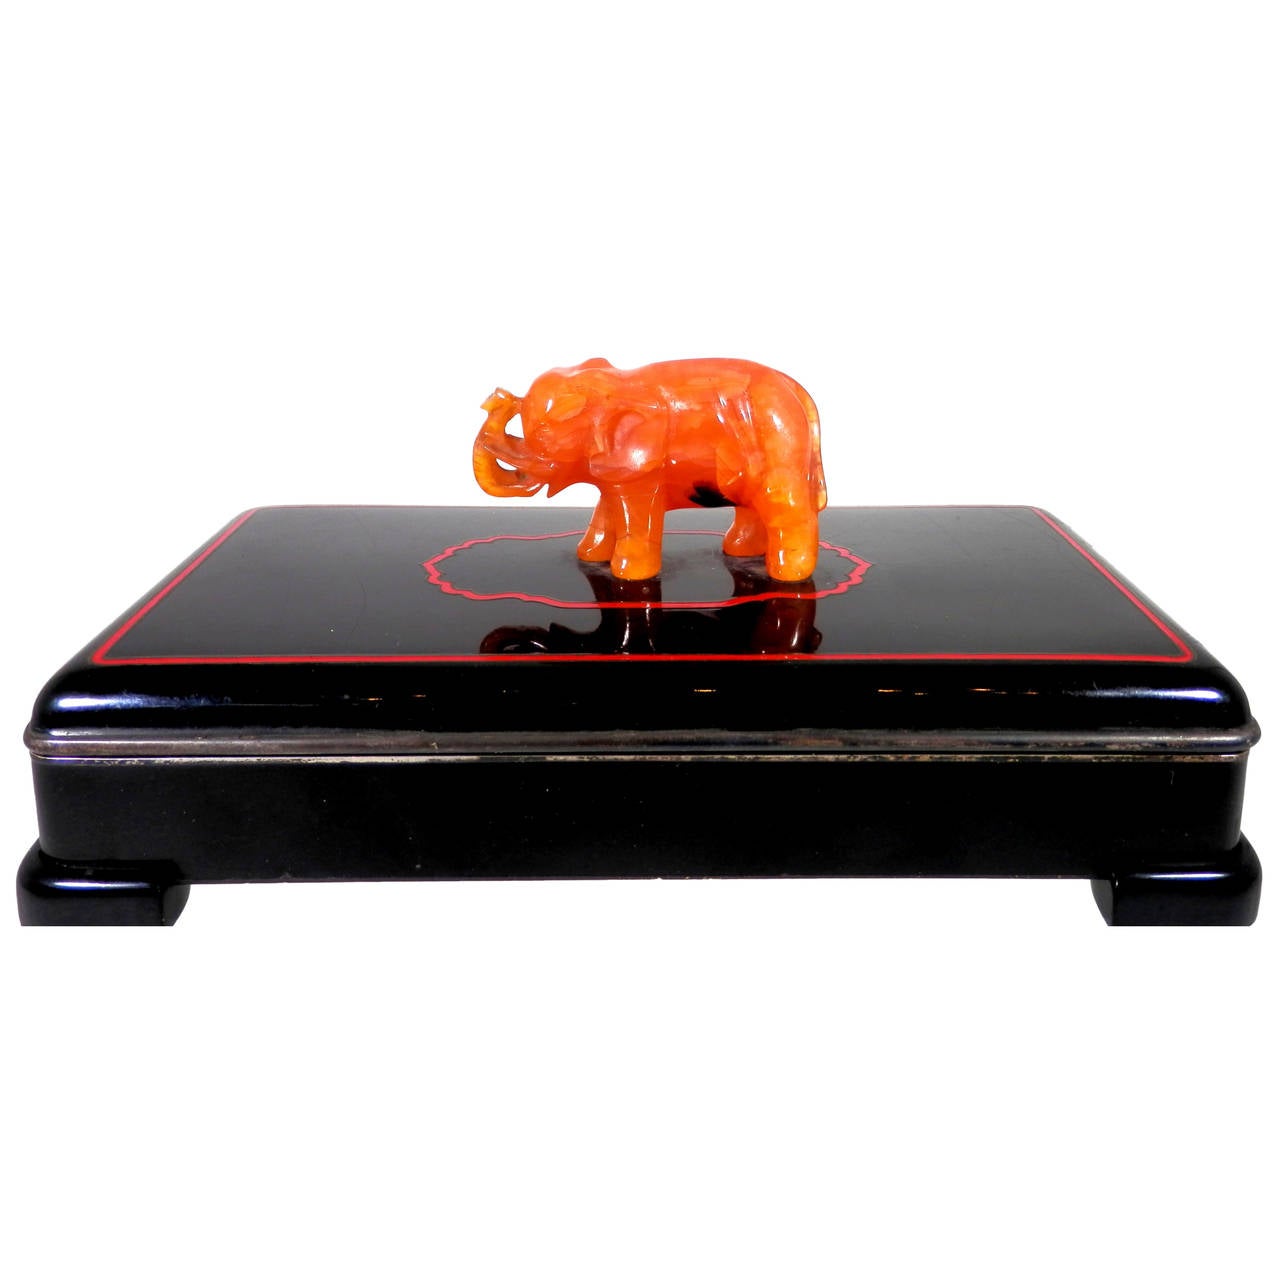 Cartier Art Deco Enamel Lacquer Box with Carved Carnelian Elephant